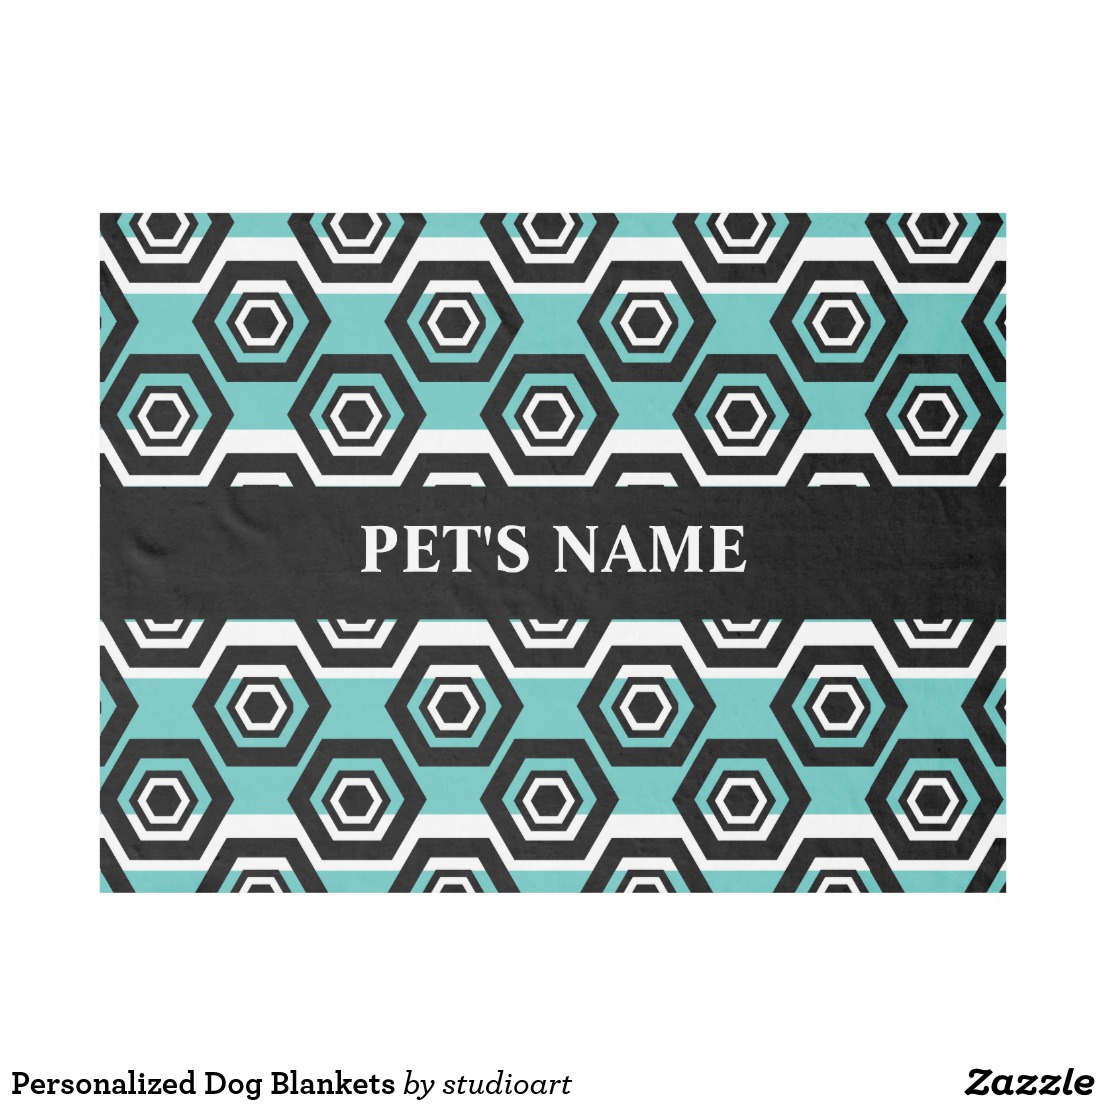 Dog blankets with names